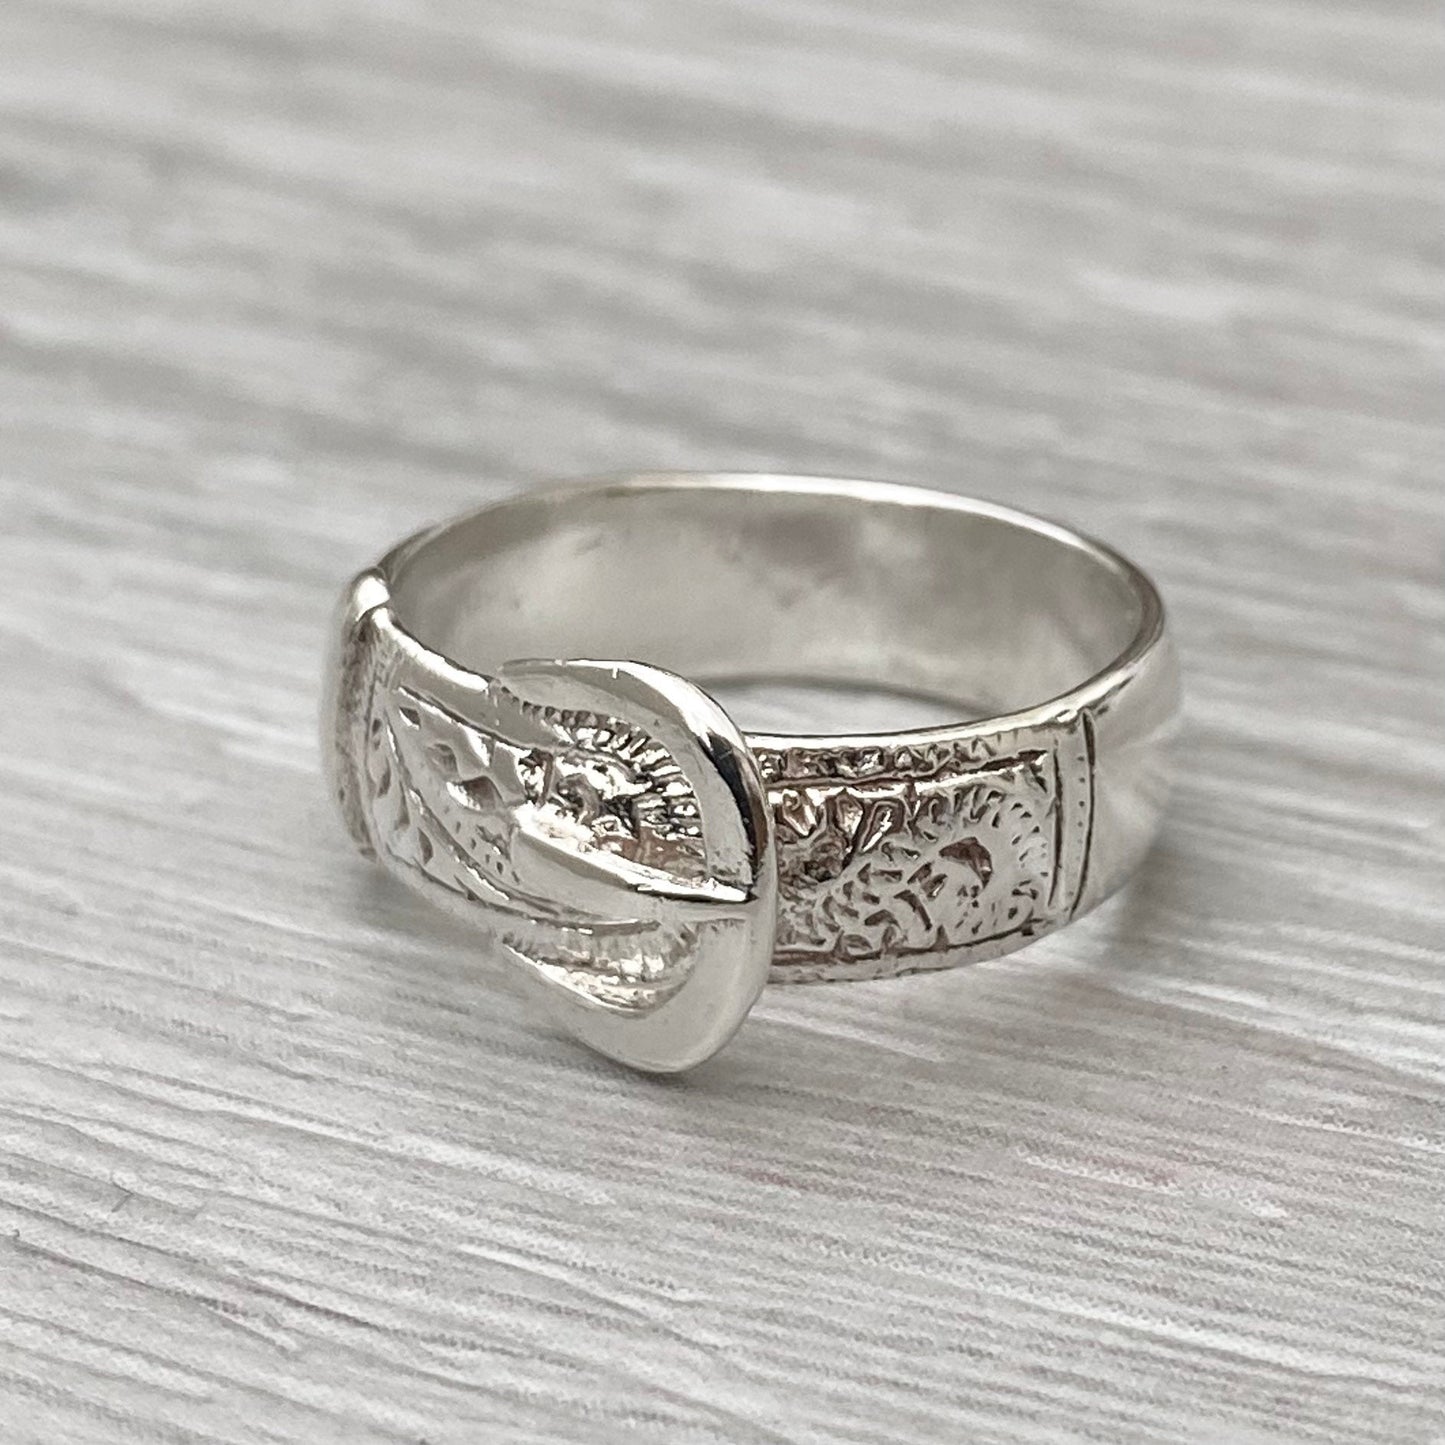 Vintage sterling silver engraved buckle ring - 1970s